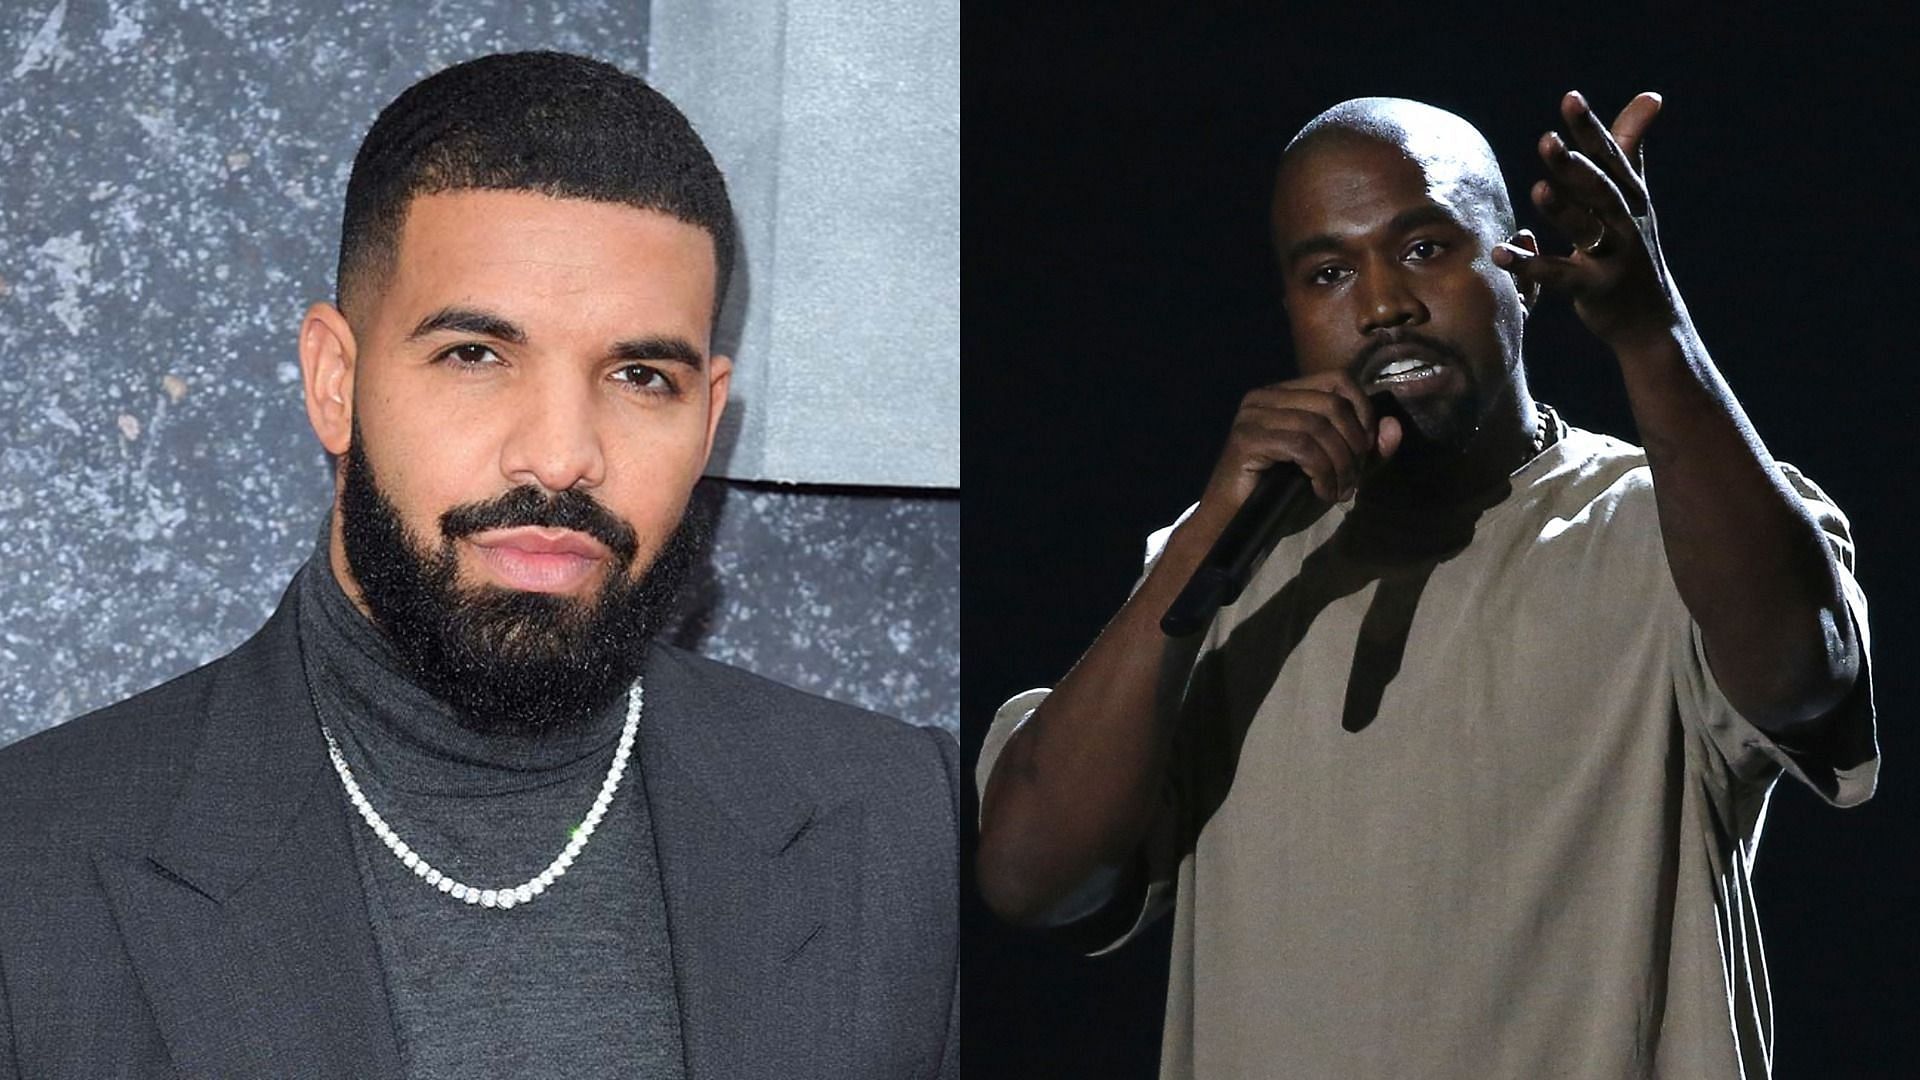 The Drake and Kanye beef explained as duo pose for photo together